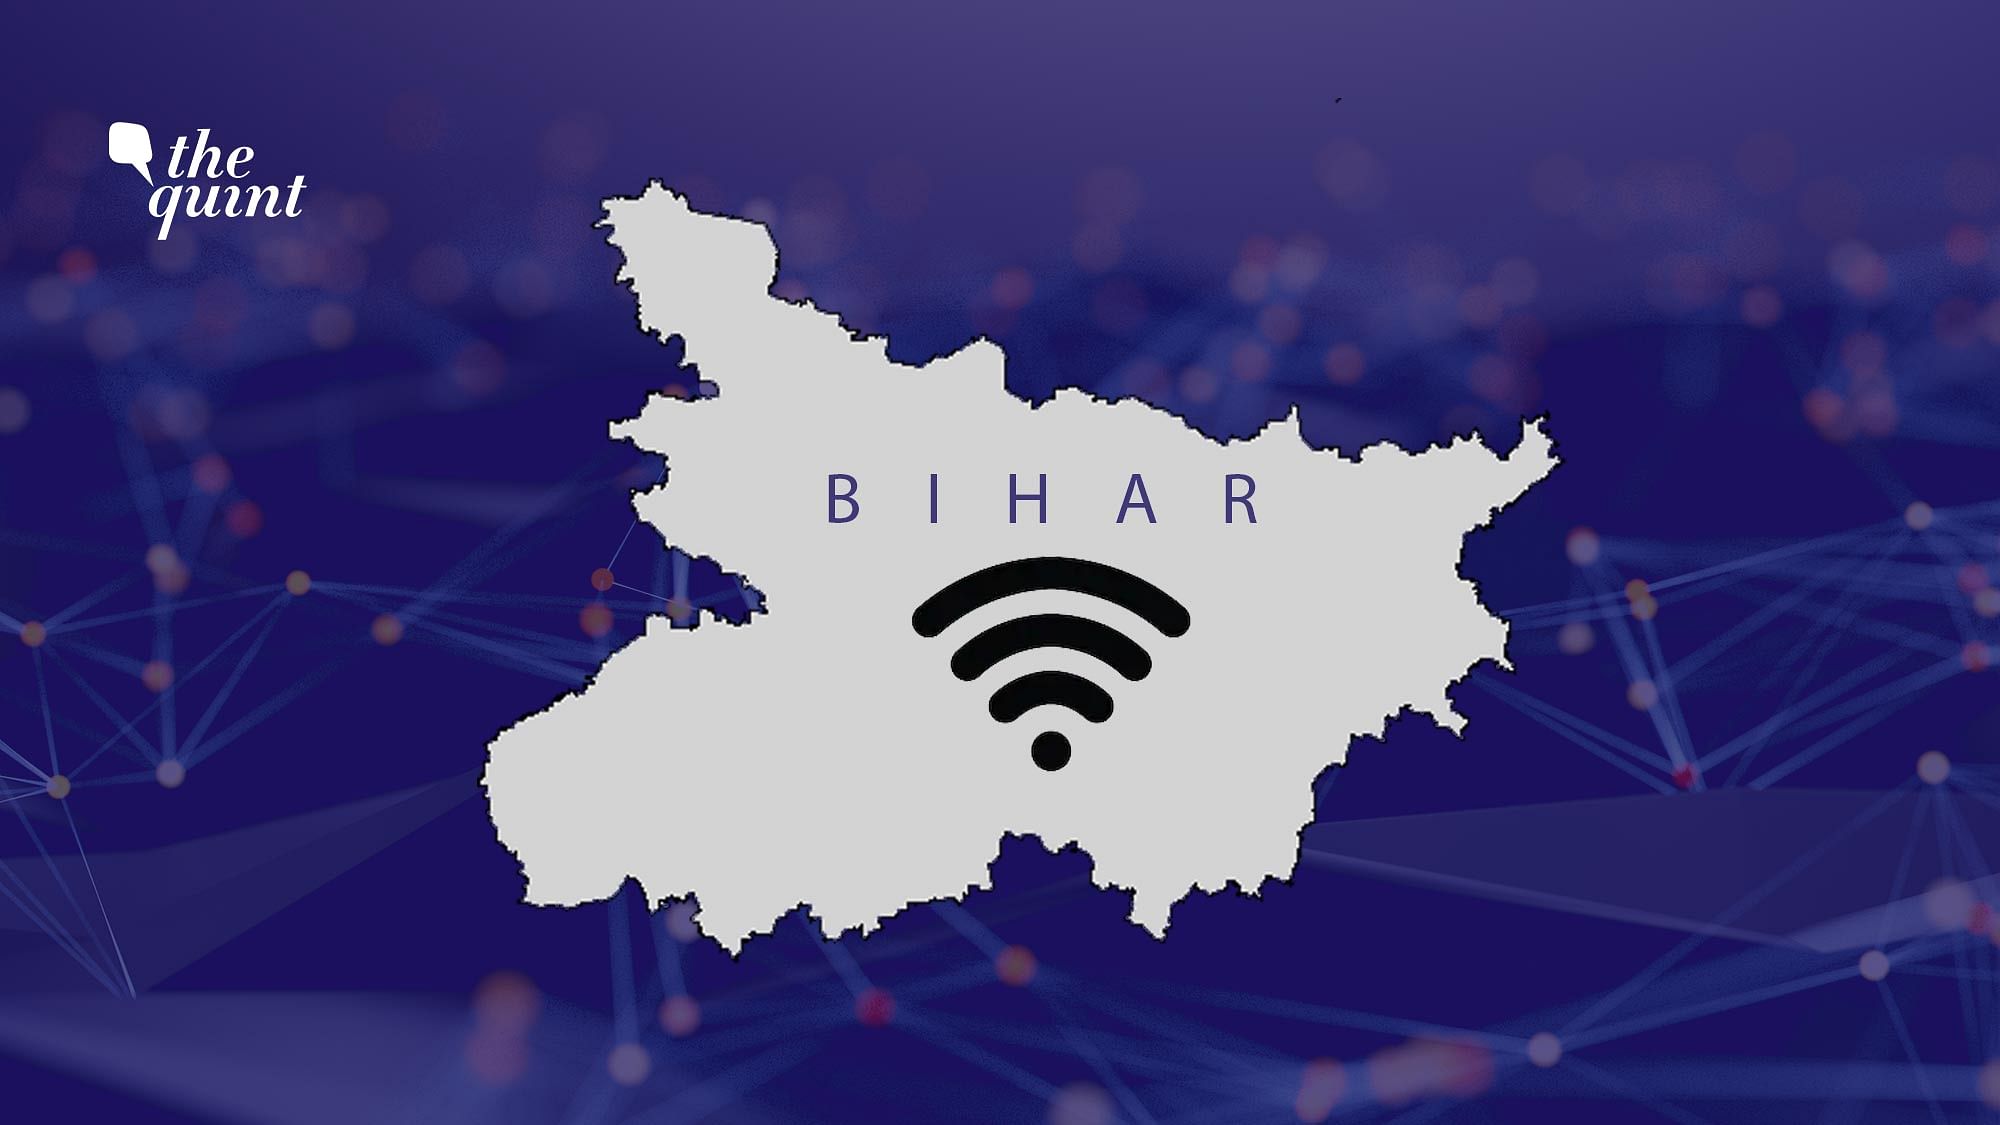 Prime Minister Narendra Modi inaugurated a project to connect all 45,945 villages of Bihar with optical fibre-enabled internet service.